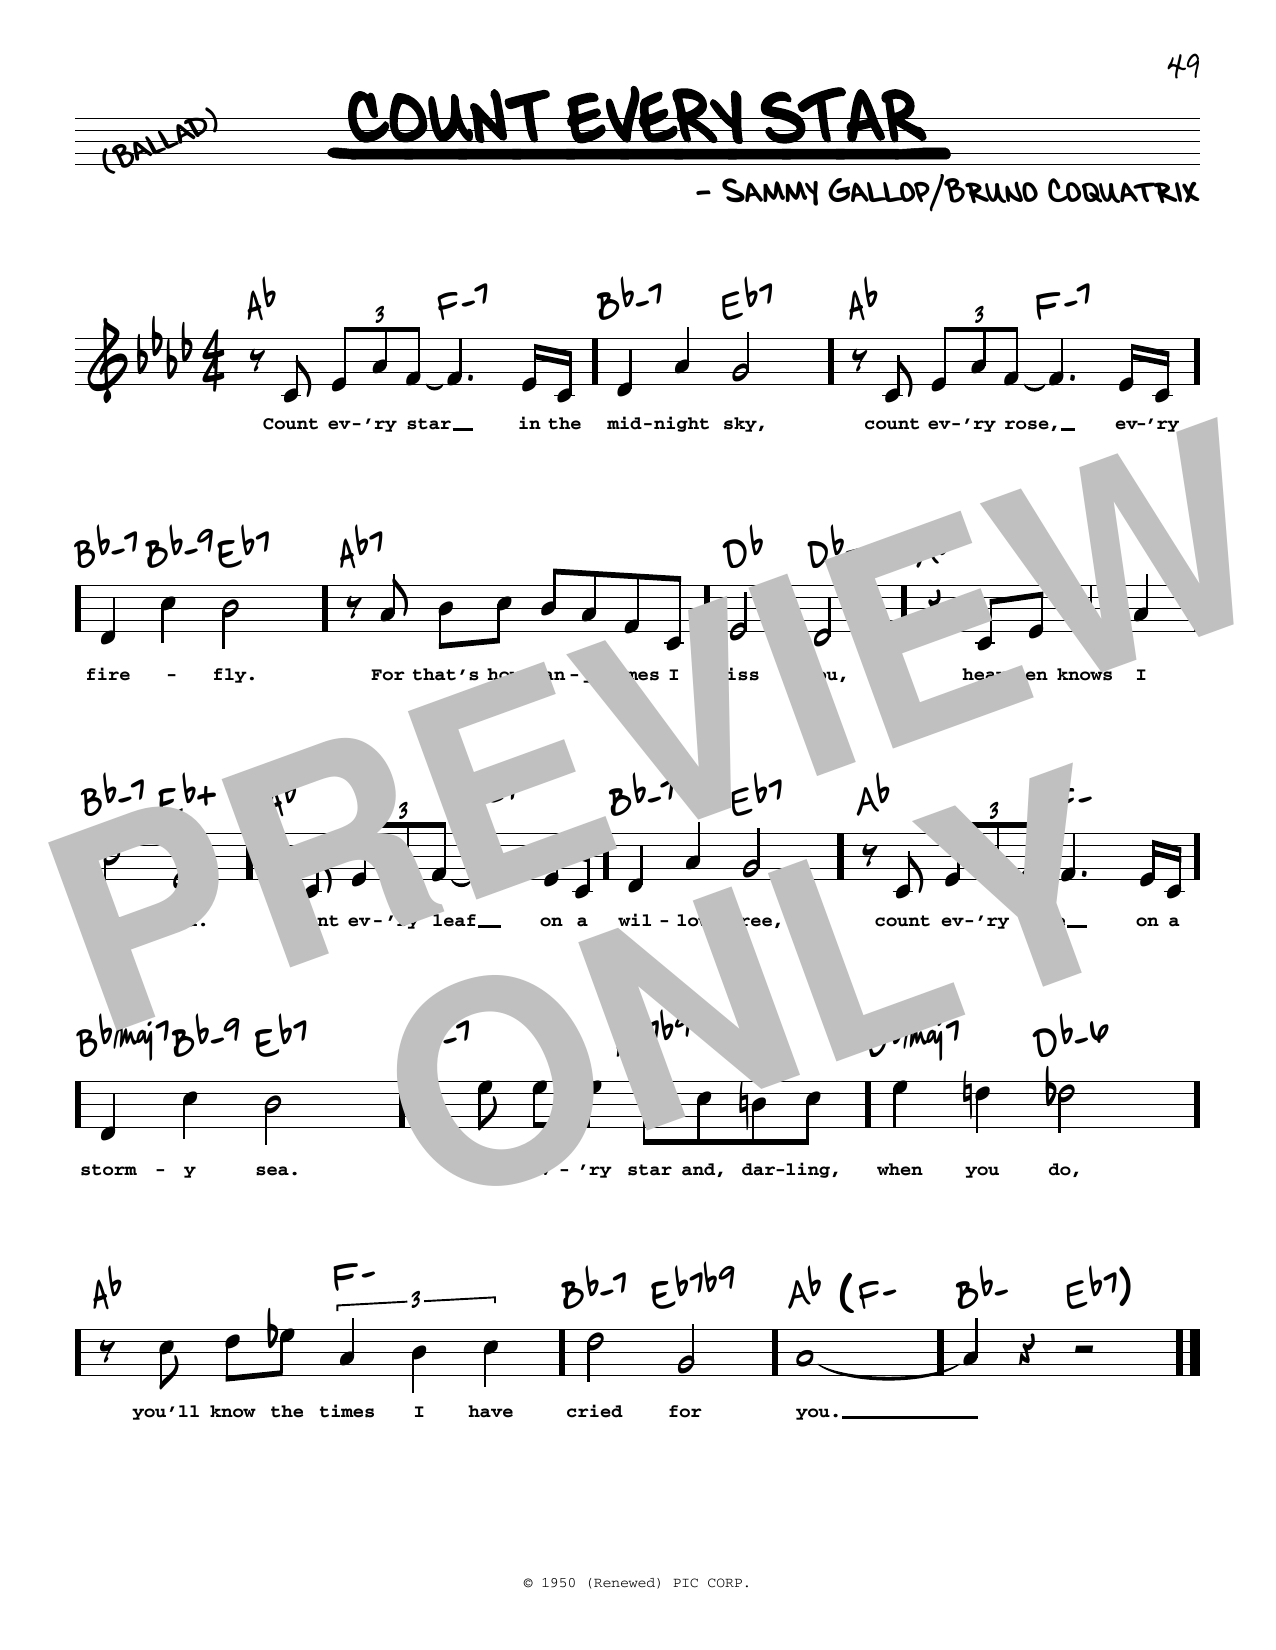 Download Sammy Gallop Count Every Star (High Voice) Sheet Music